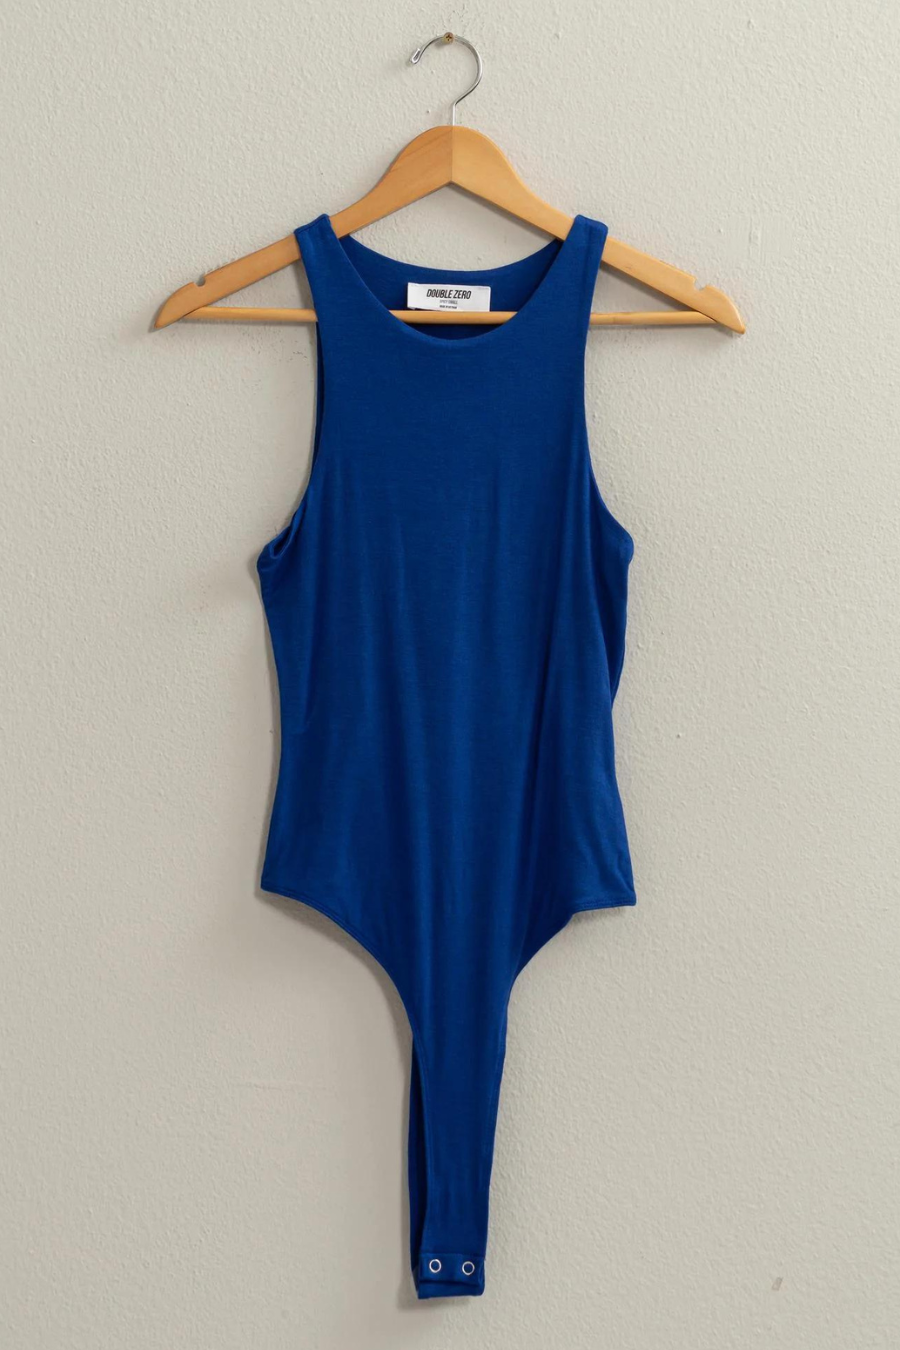 fulll length front view of sad tank bodysuit in the color blue, hanging on wooden hanger 